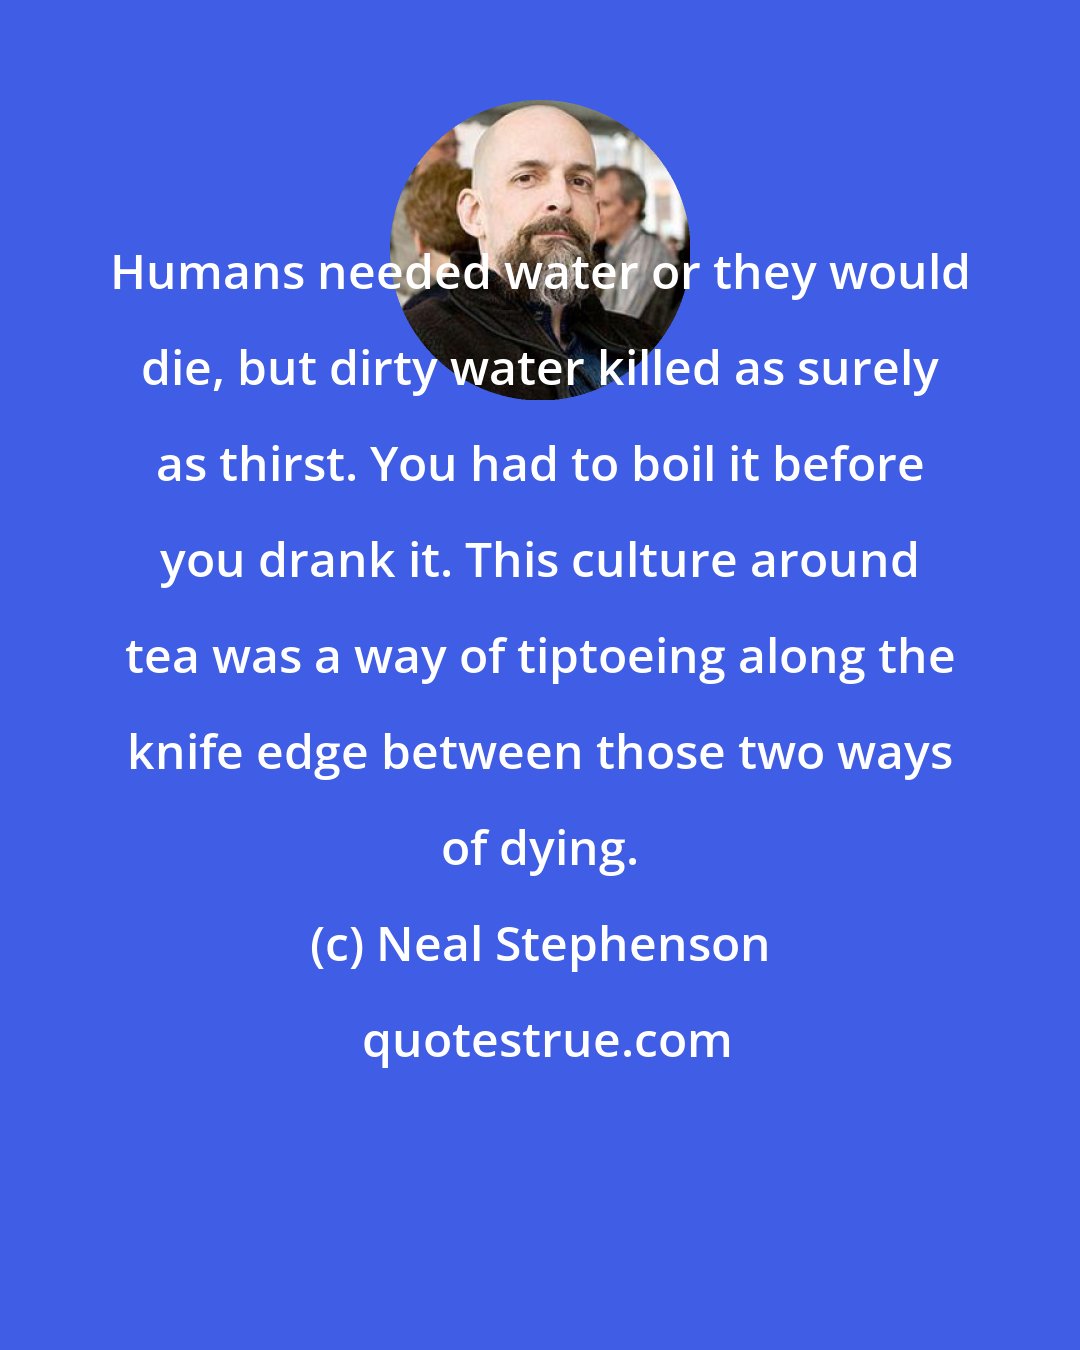 Neal Stephenson: Humans needed water or they would die, but dirty water killed as surely as thirst. You had to boil it before you drank it. This culture around tea was a way of tiptoeing along the knife edge between those two ways of dying.